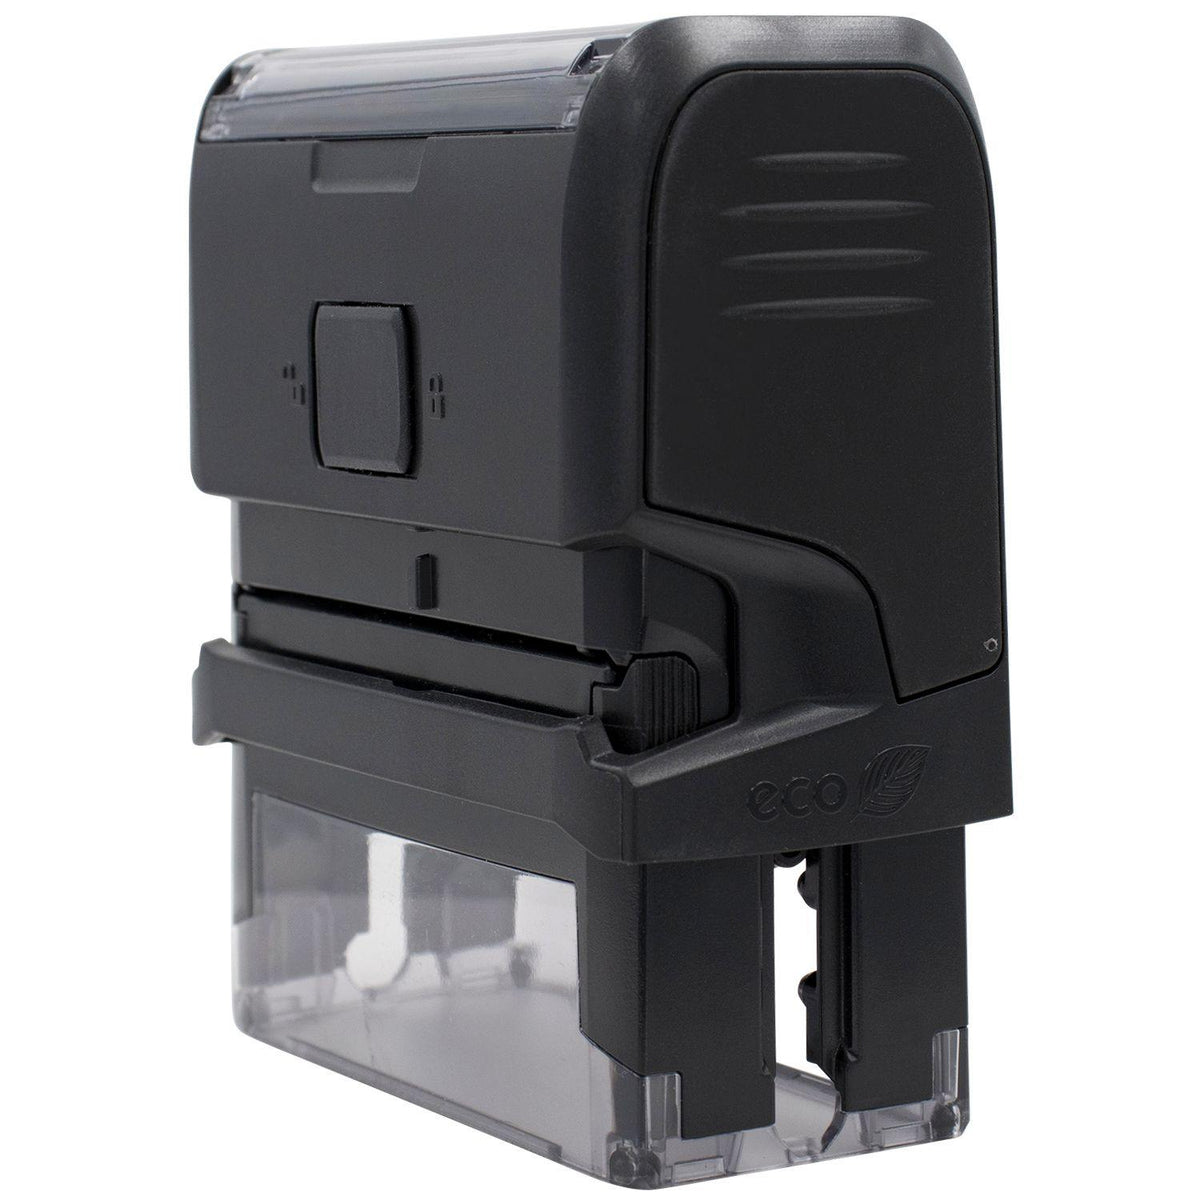 Self Inking Expert Witness Stamp - Engineer Seal Stamps - Brand_Trodat, Impression Size_Small, Stamp Type_Self-Inking Stamp, Type of Use_Legal